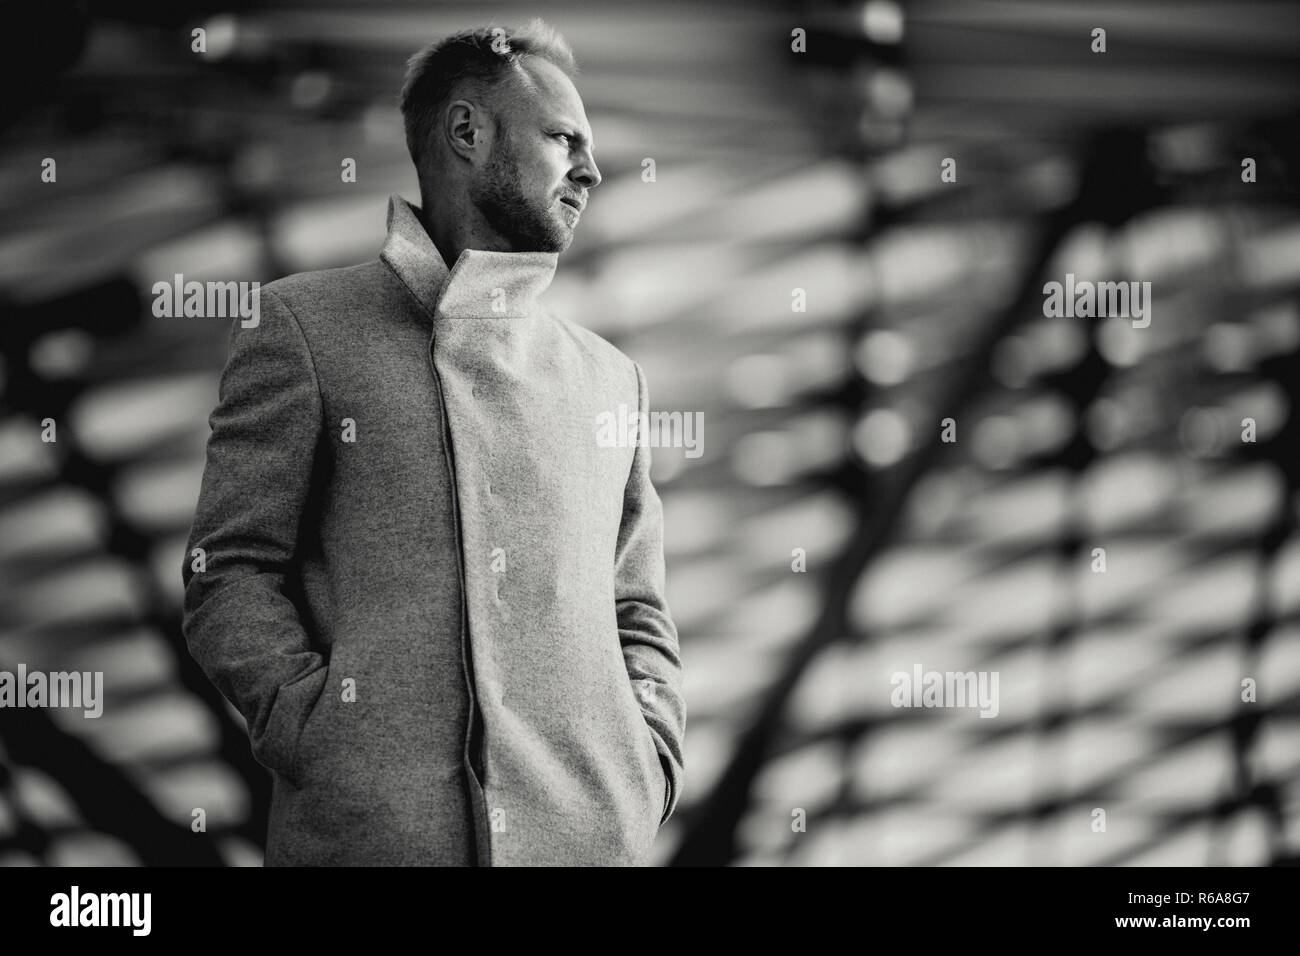 Black and white photo under film of serious man in coat under glass roof Stock Photo